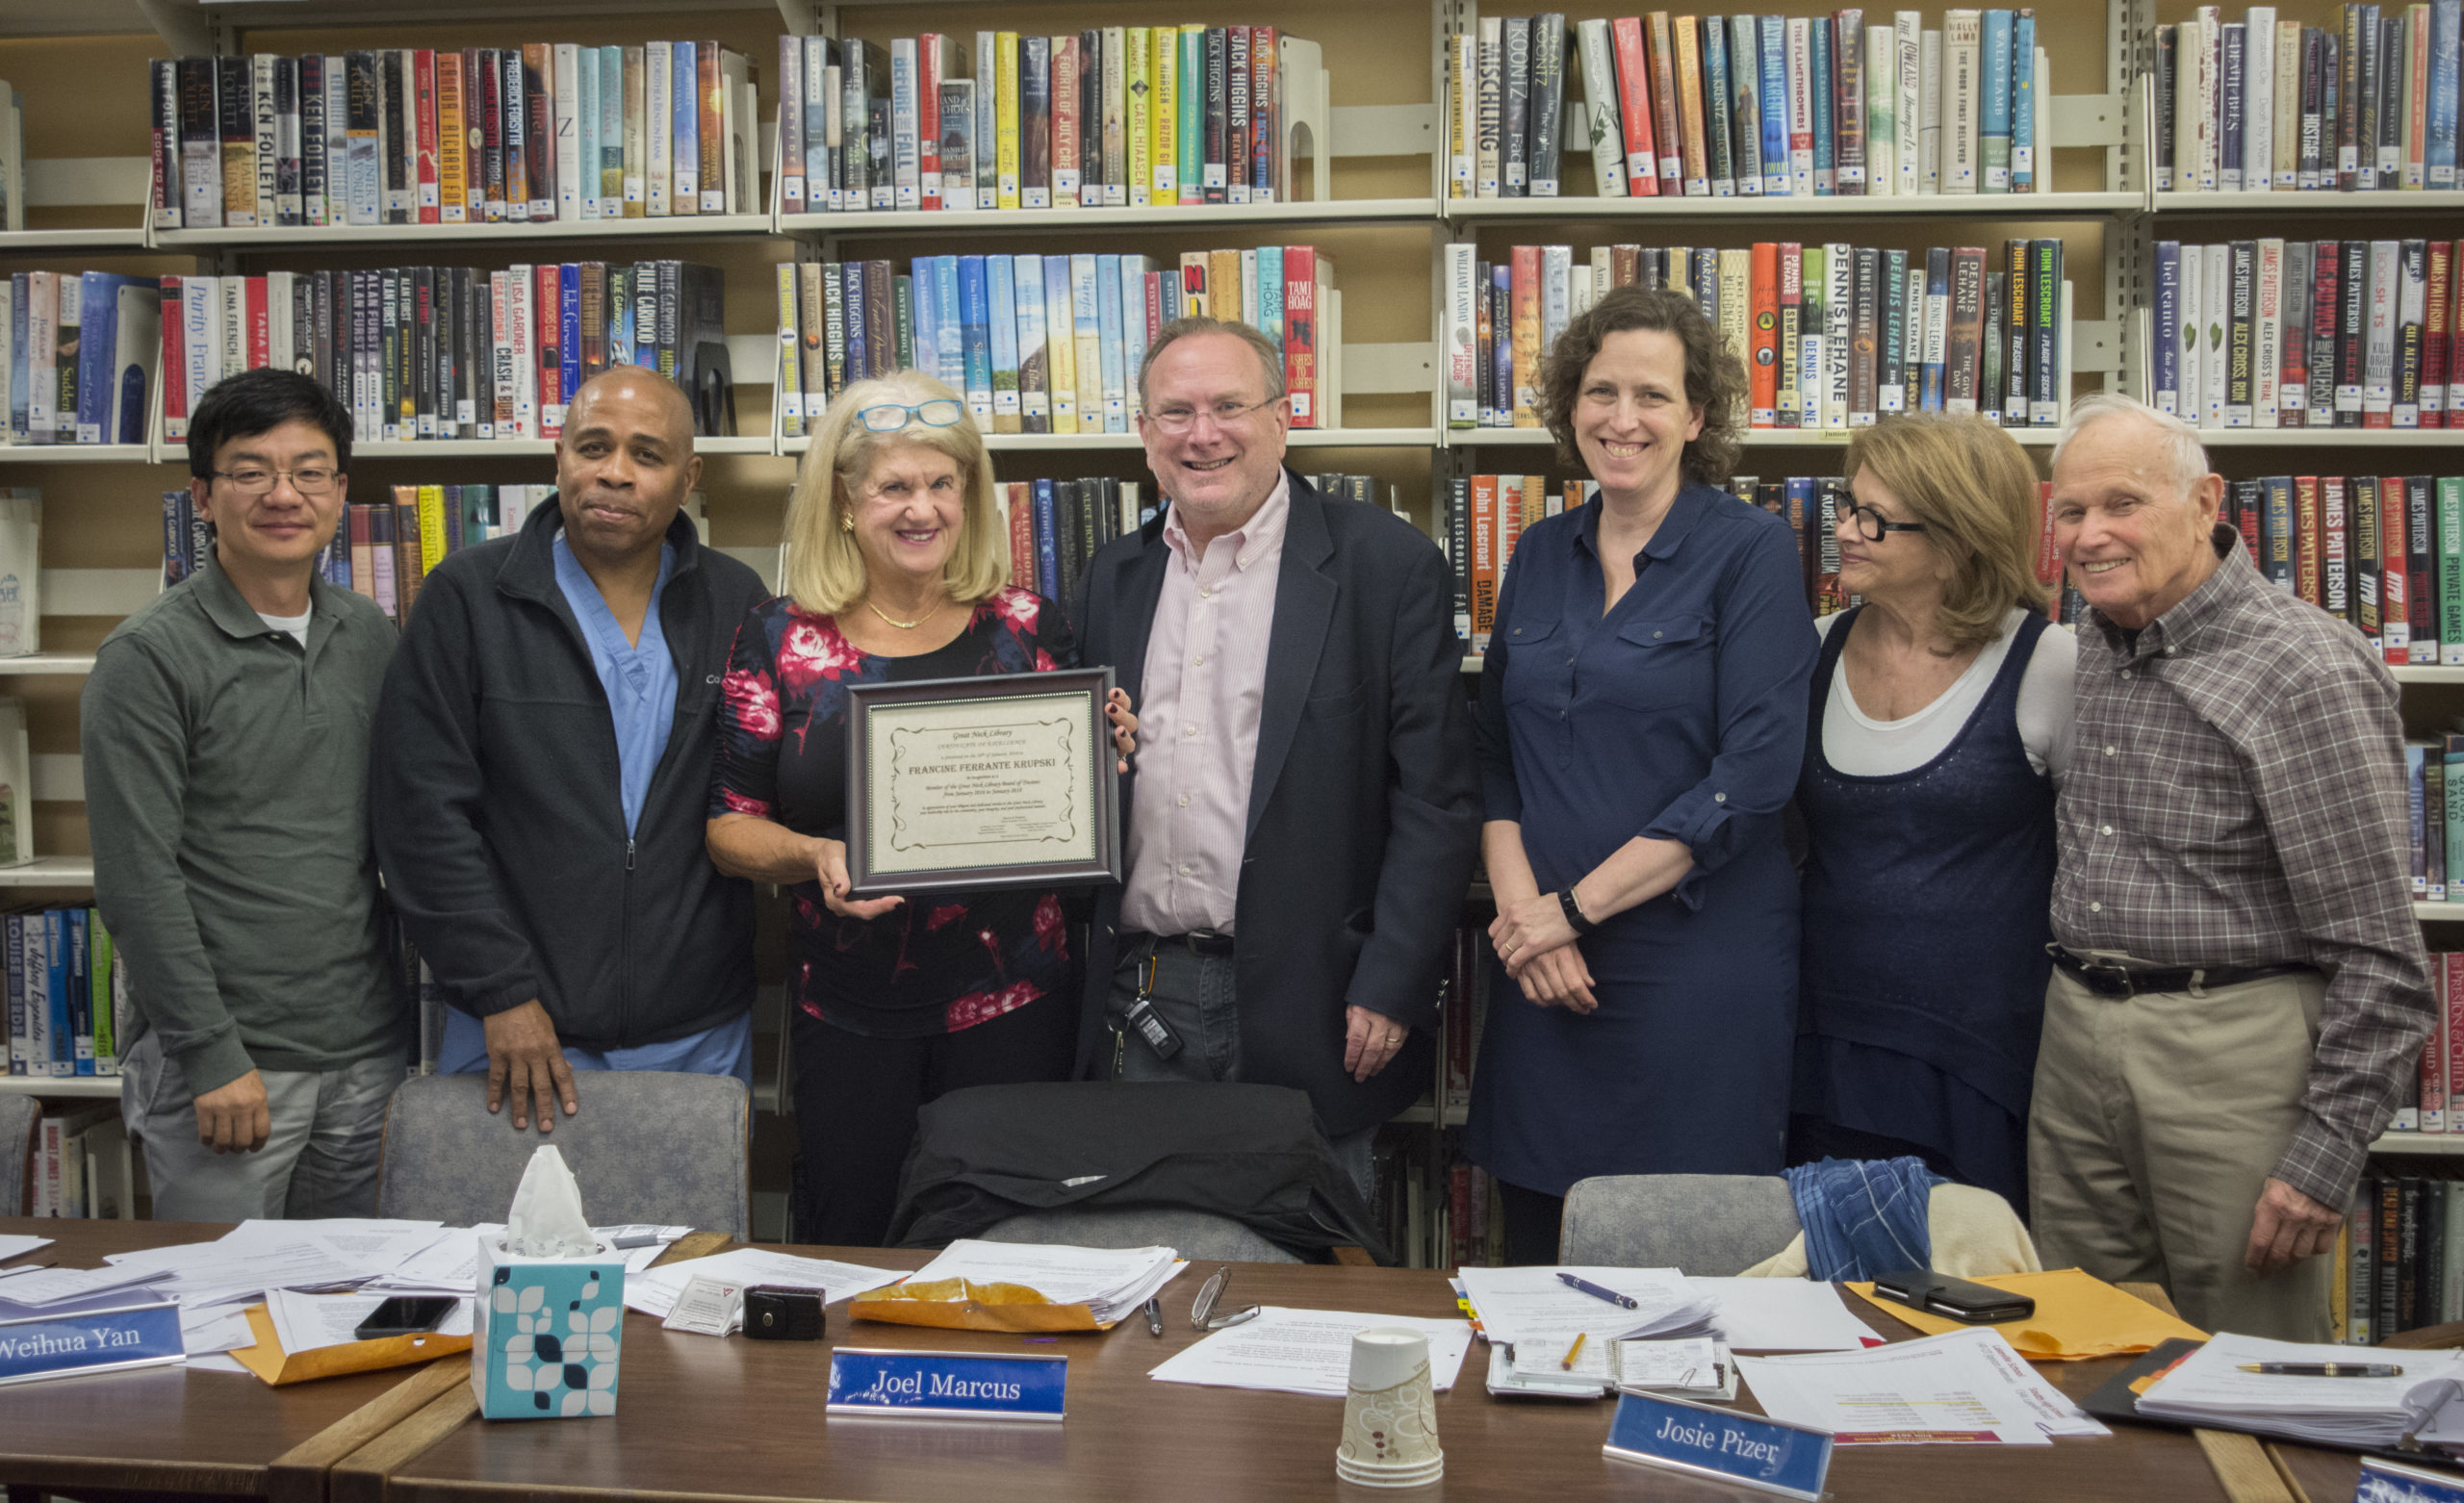 The library board honored Francine Ferrante Krupski, a former trustee, for her years of service on the Great Neck Library Board of Trustees. (Photo by Janelle Clausen)